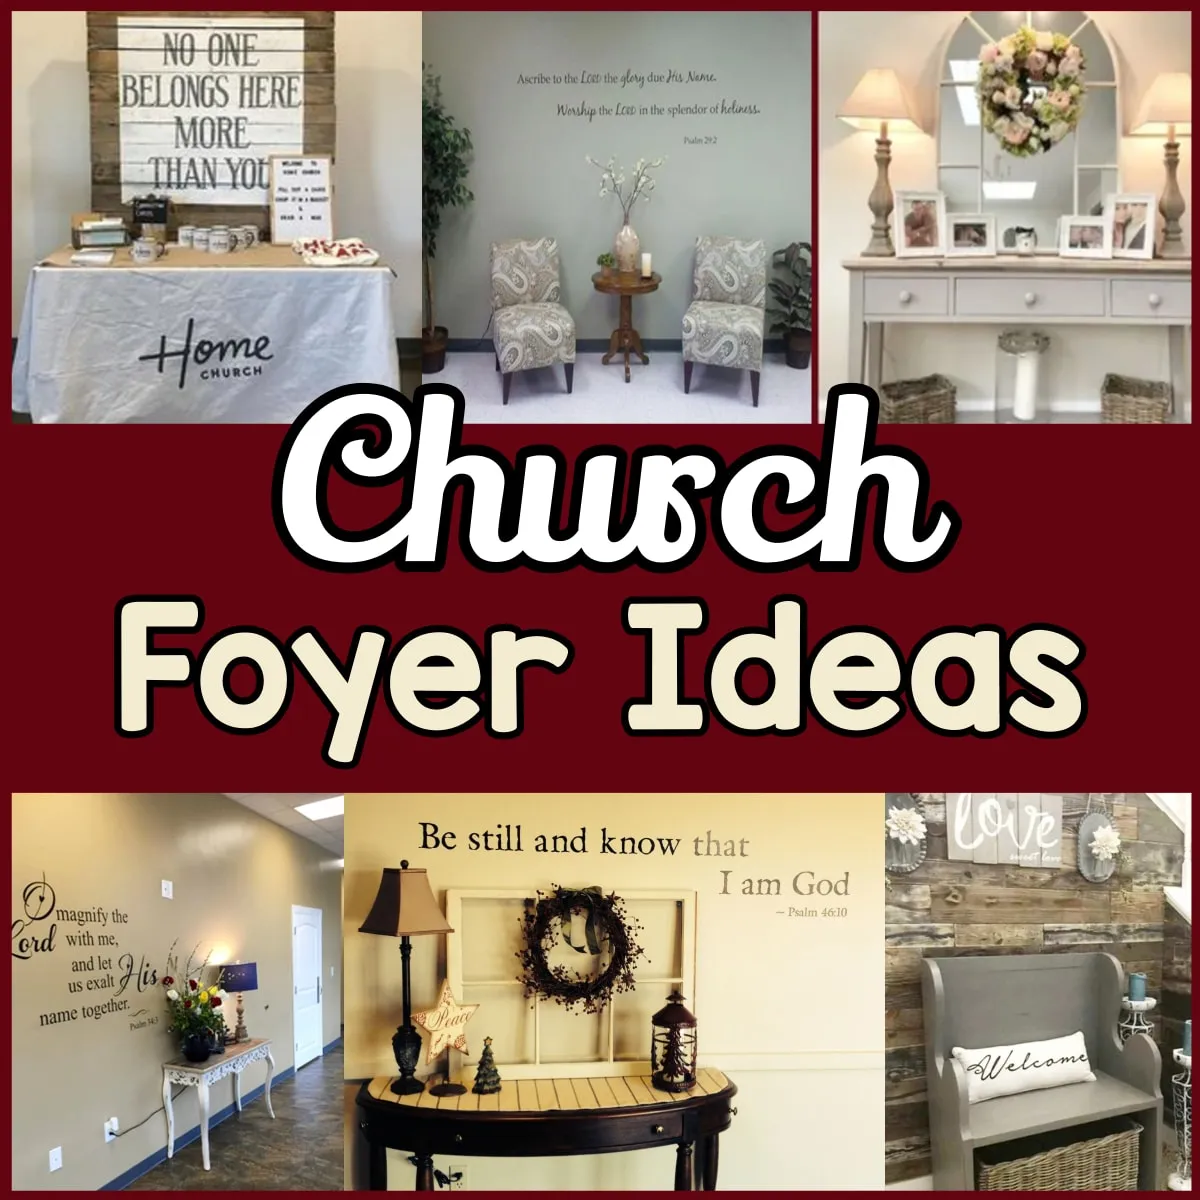 Small church foyer design ideas - where we put our creative church bulletin boards we're famous for